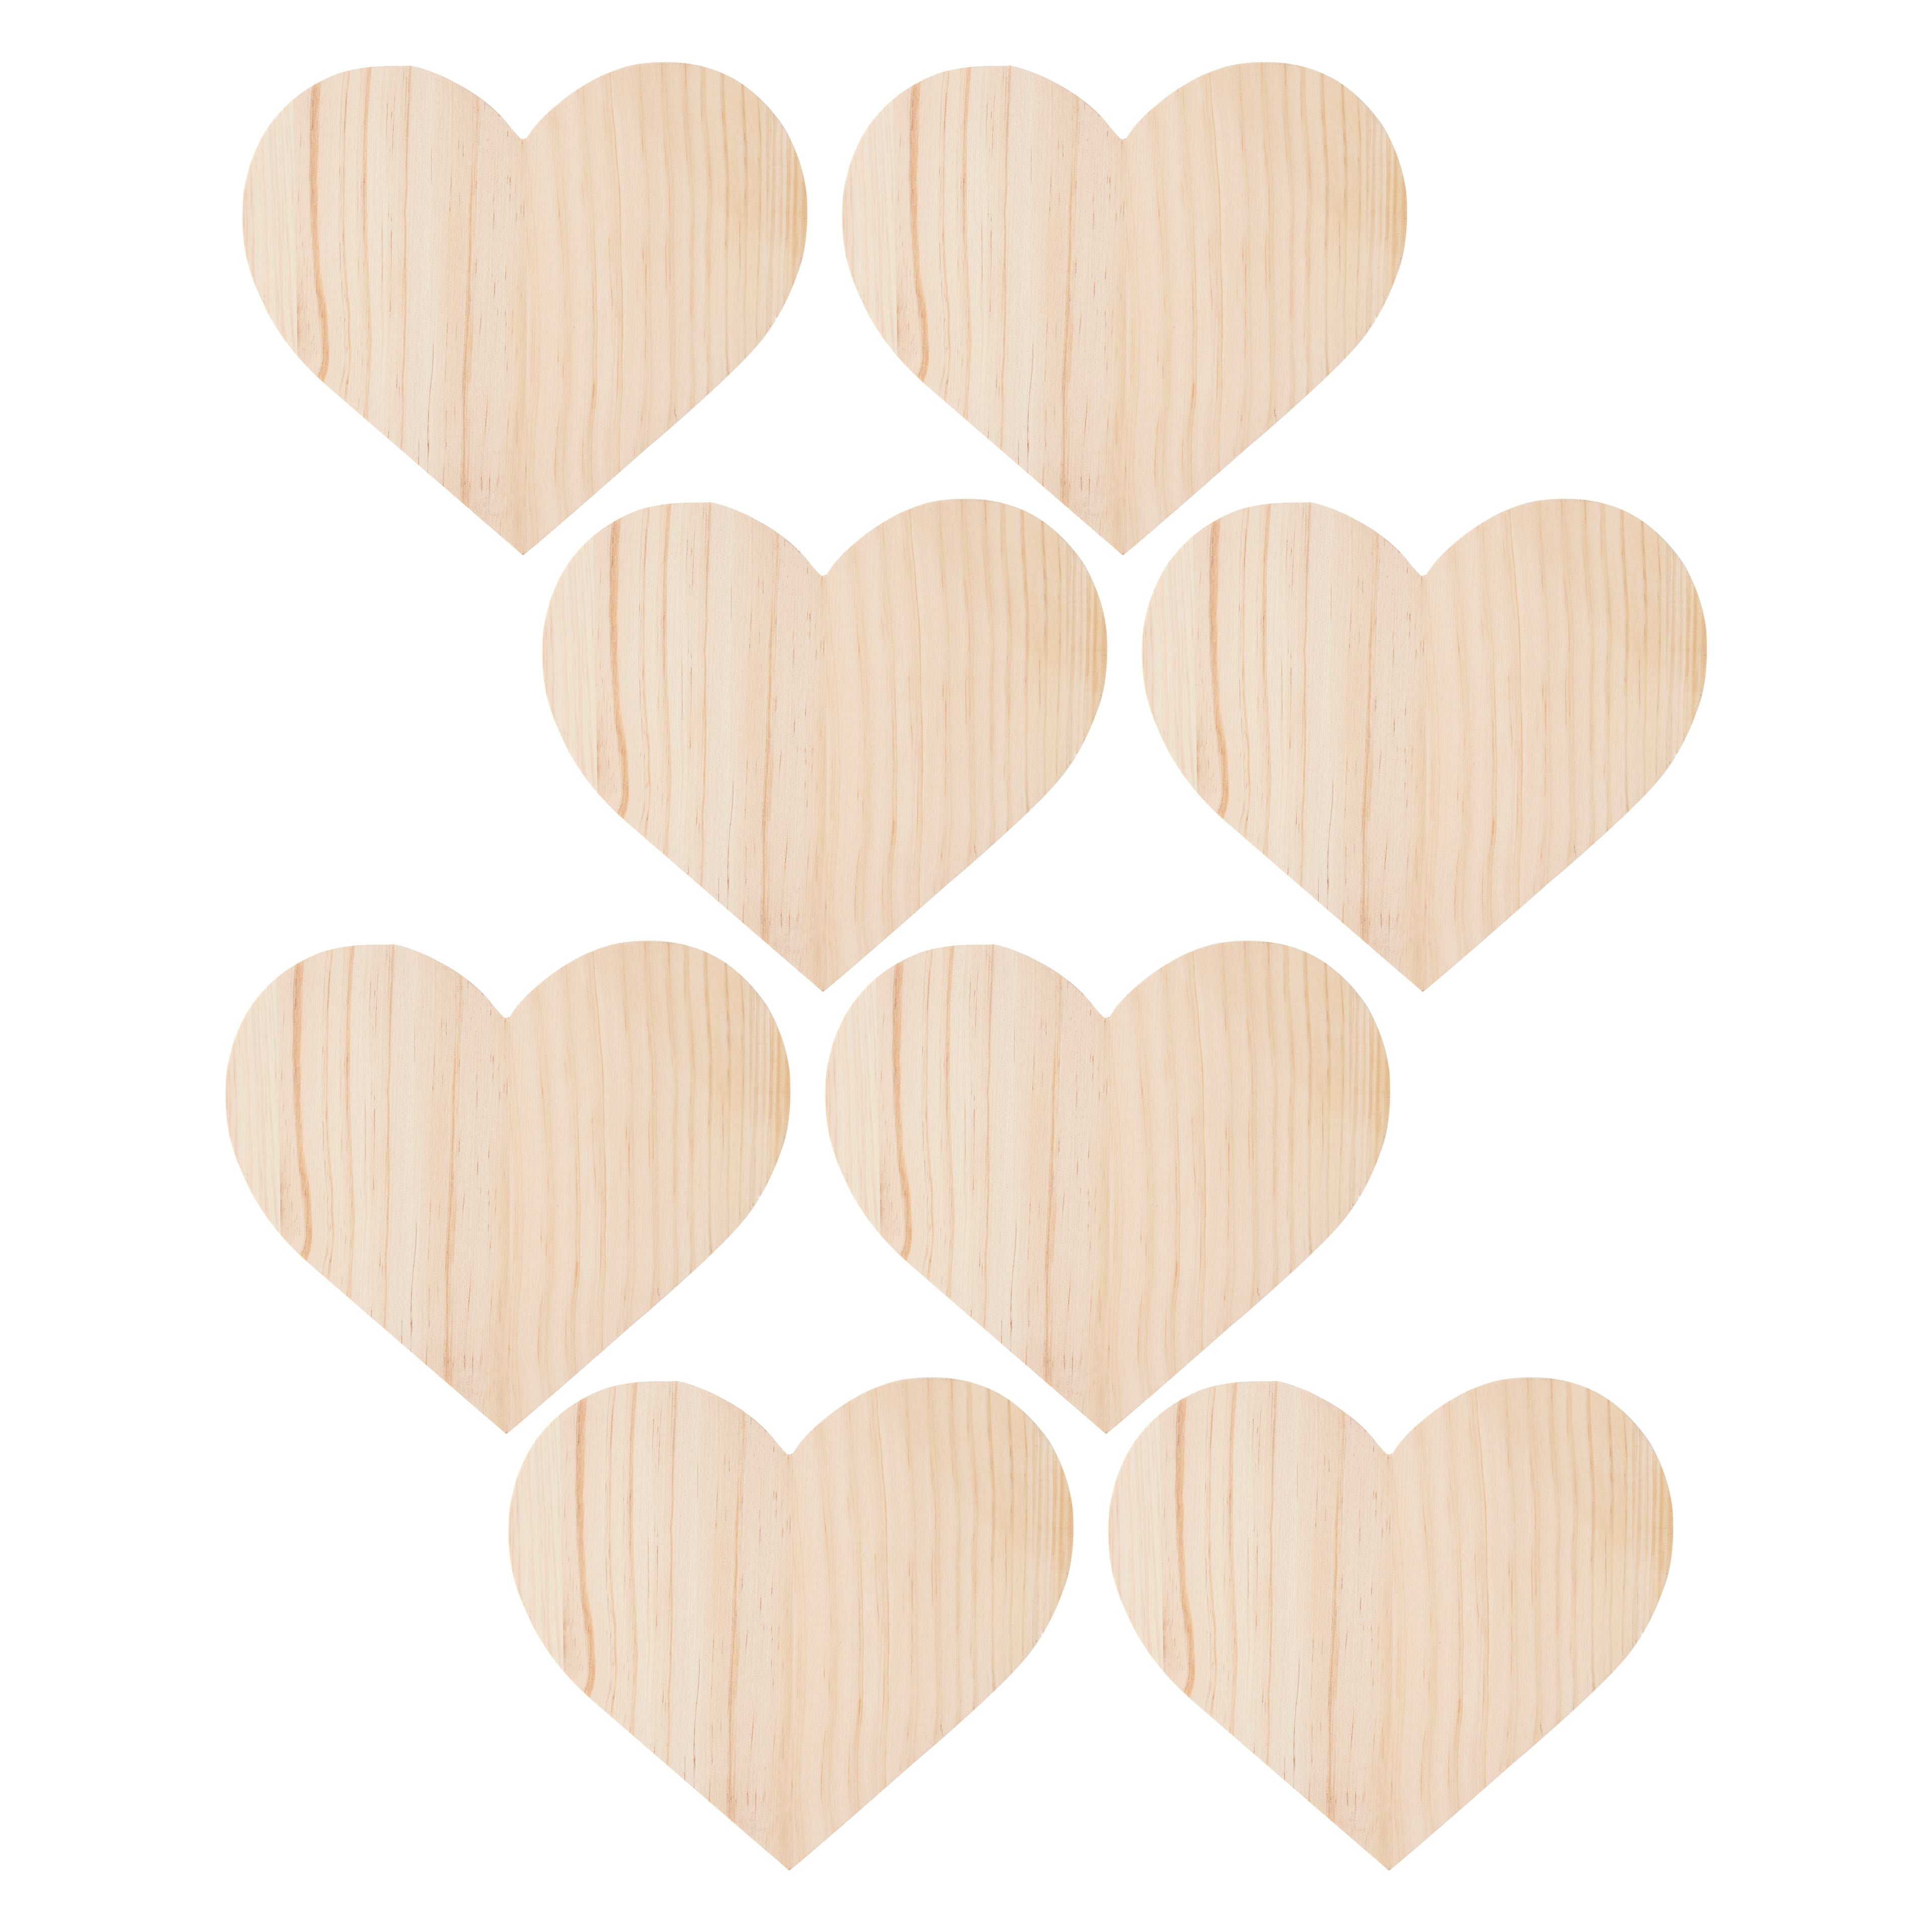 20 Pcs Wooden Heart Ornaments Love Heart Shaped Ornaments Hanging with  Ropes for DIY Crafts Wedding Valentine's Day Decorations (Red and Pink) 